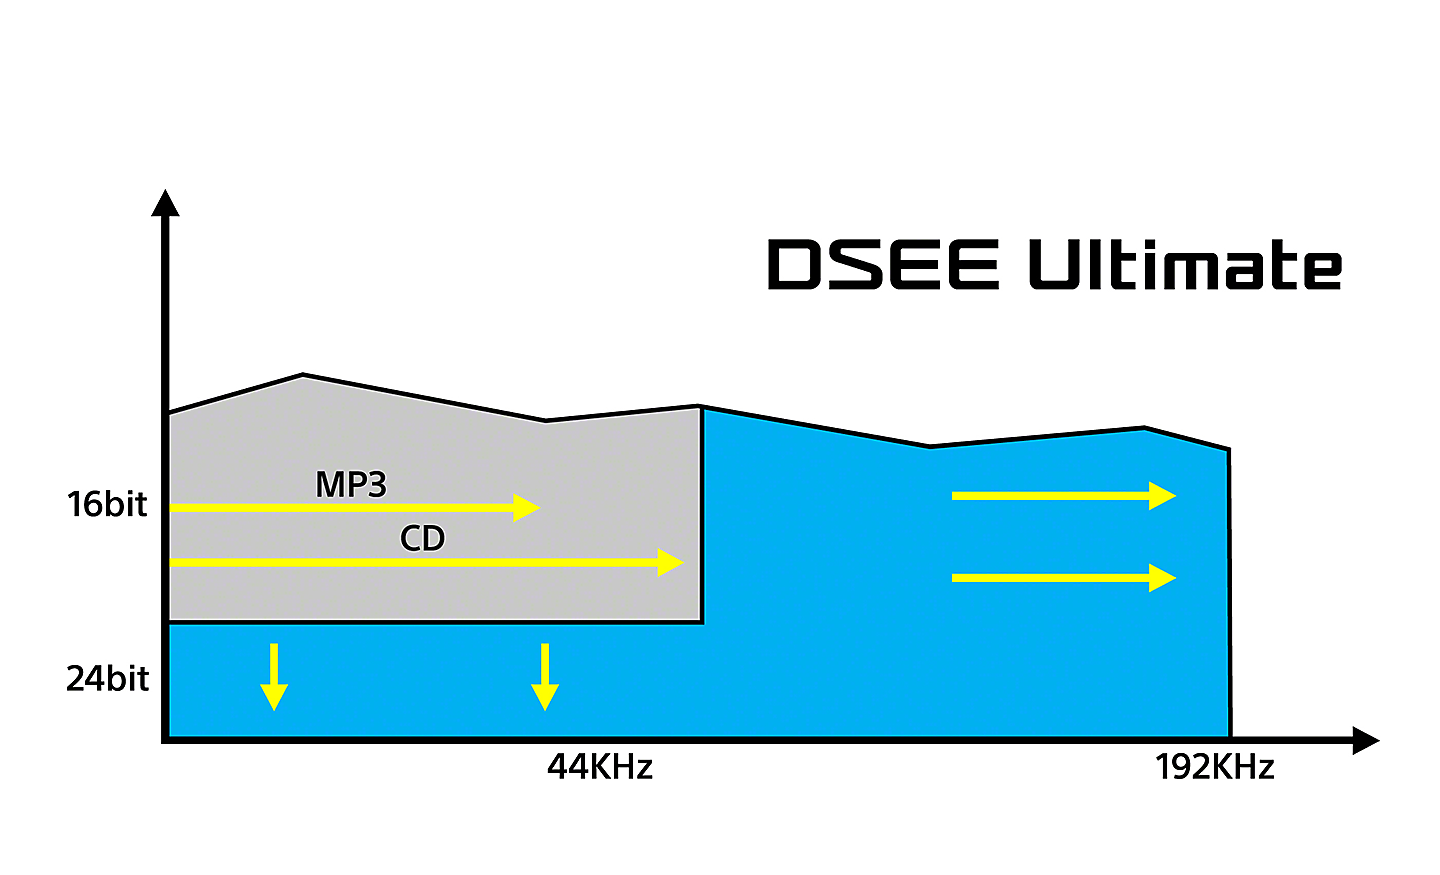 Graph showing the effects of DSEE Ultimate on digital music